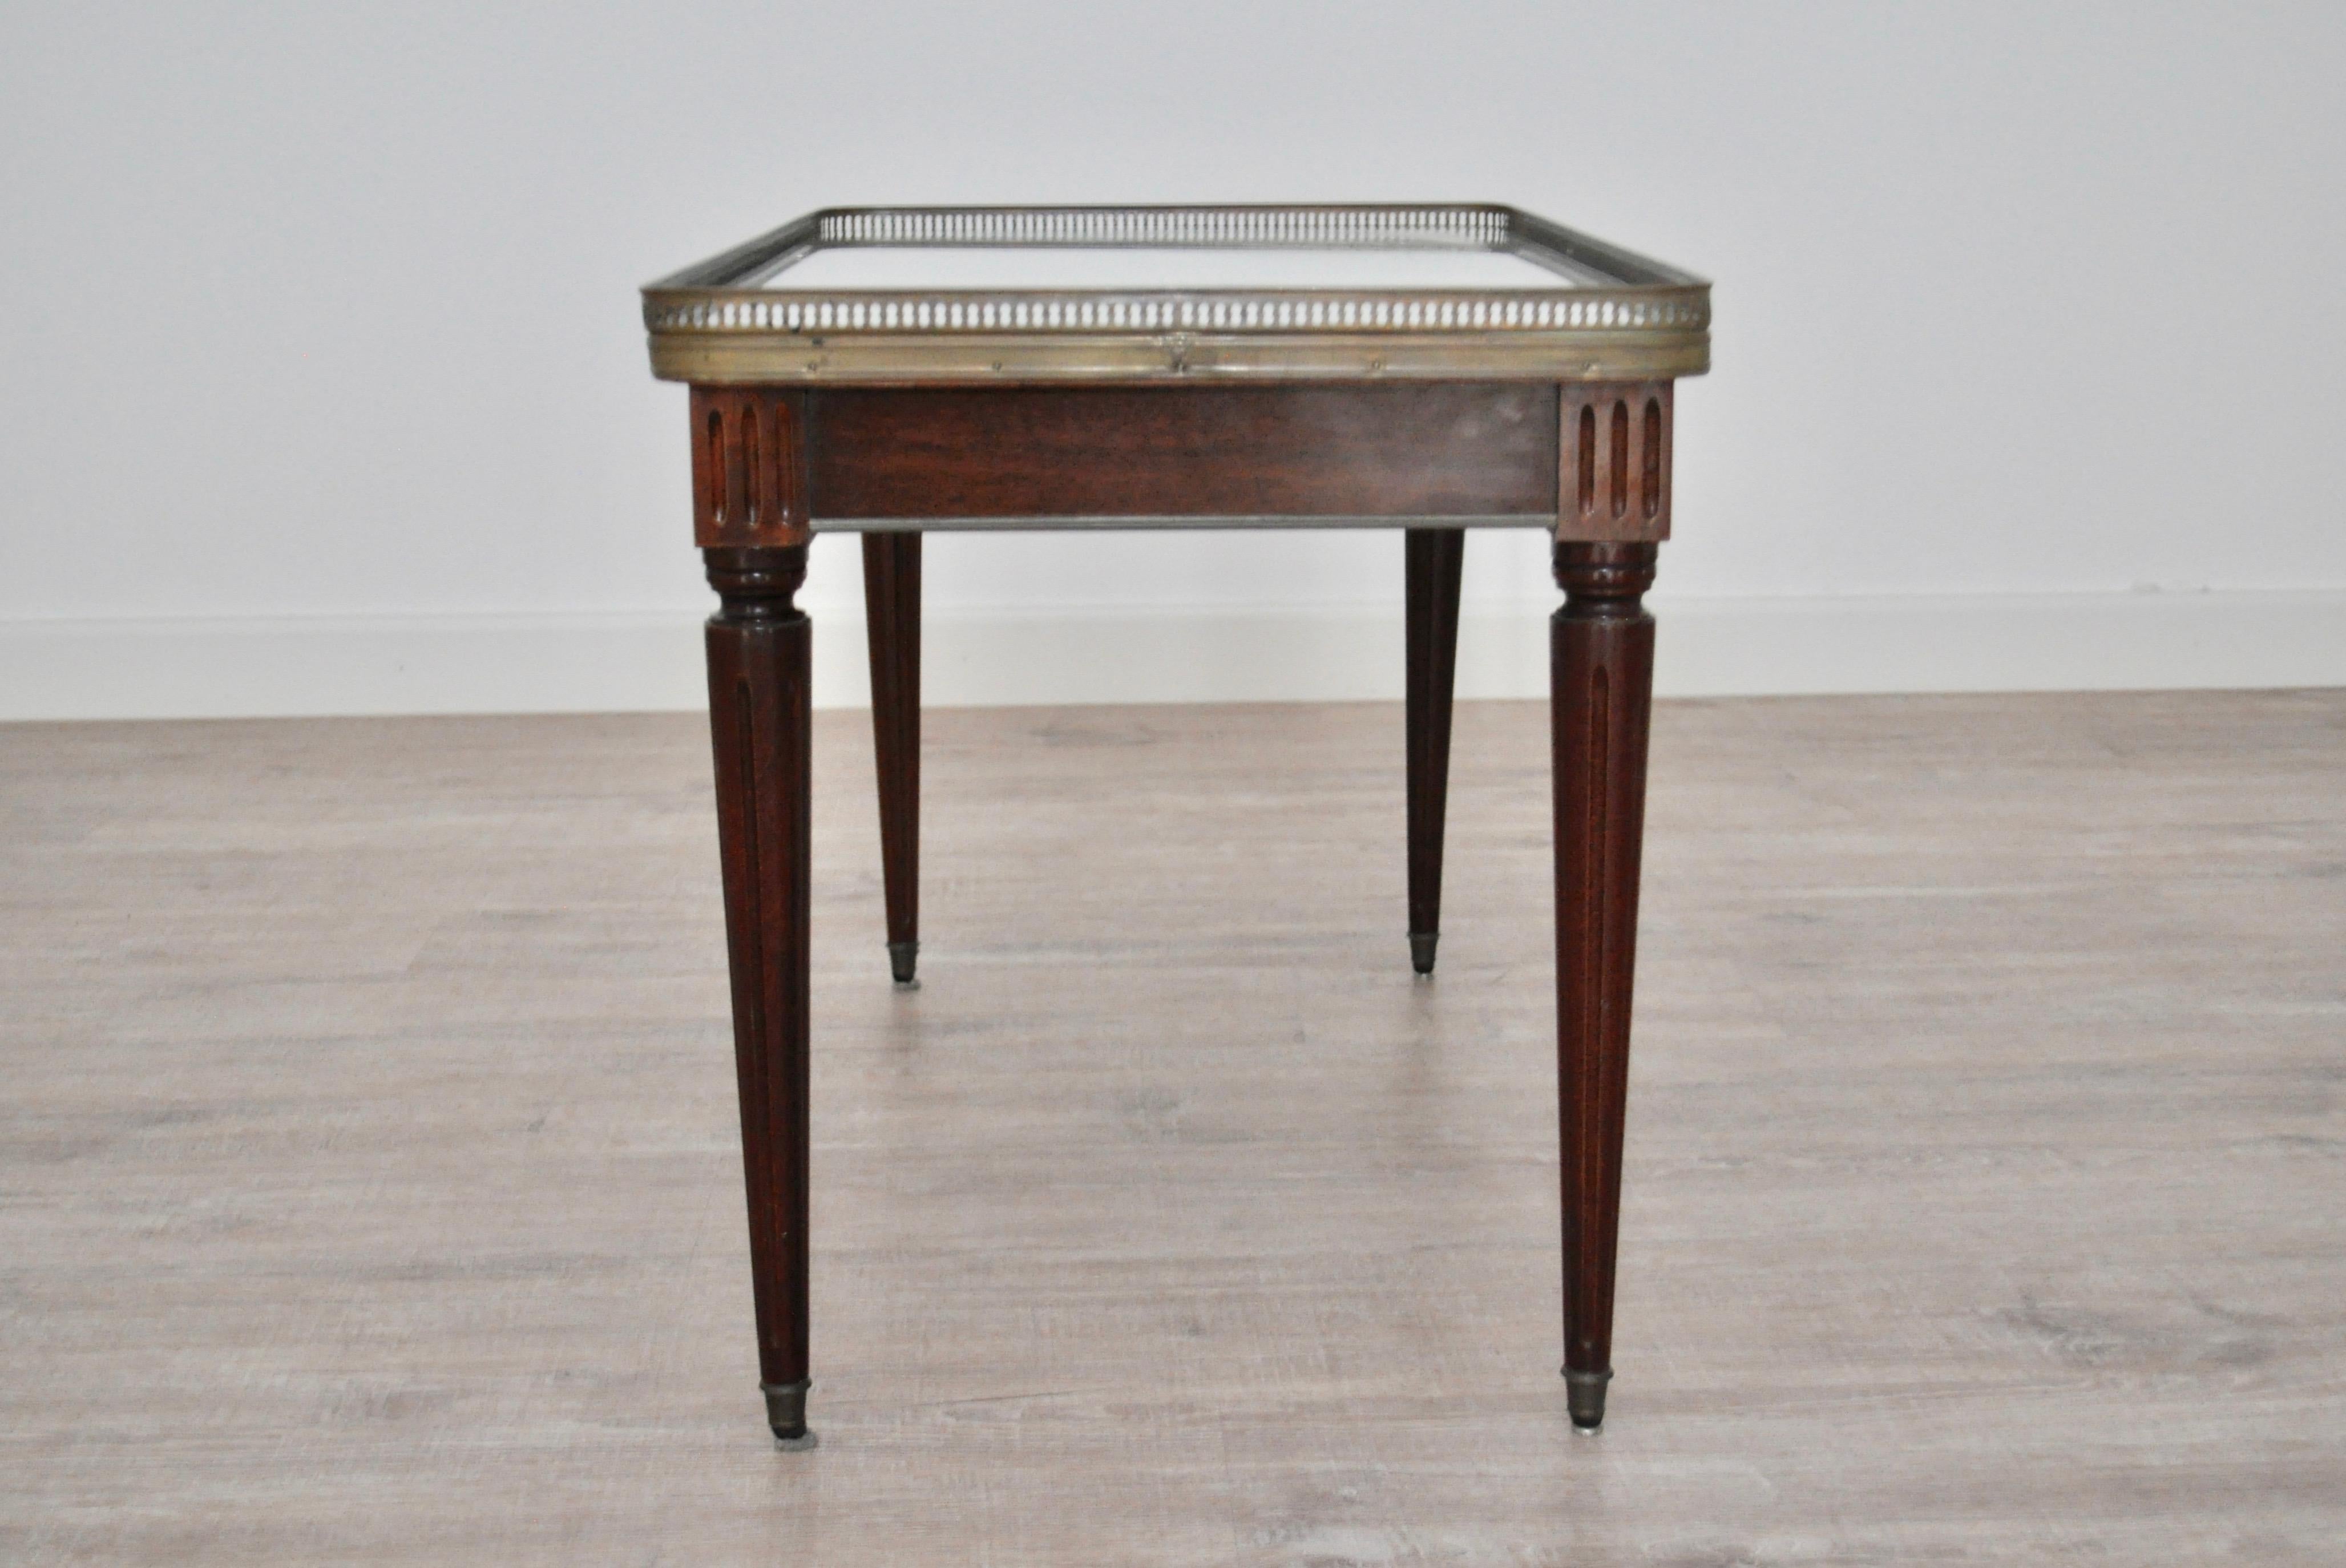 Hand-Carved Coffee Table in Carrara Marble, Brass Part, Mahogany Wood, Italy, 1900s For Sale